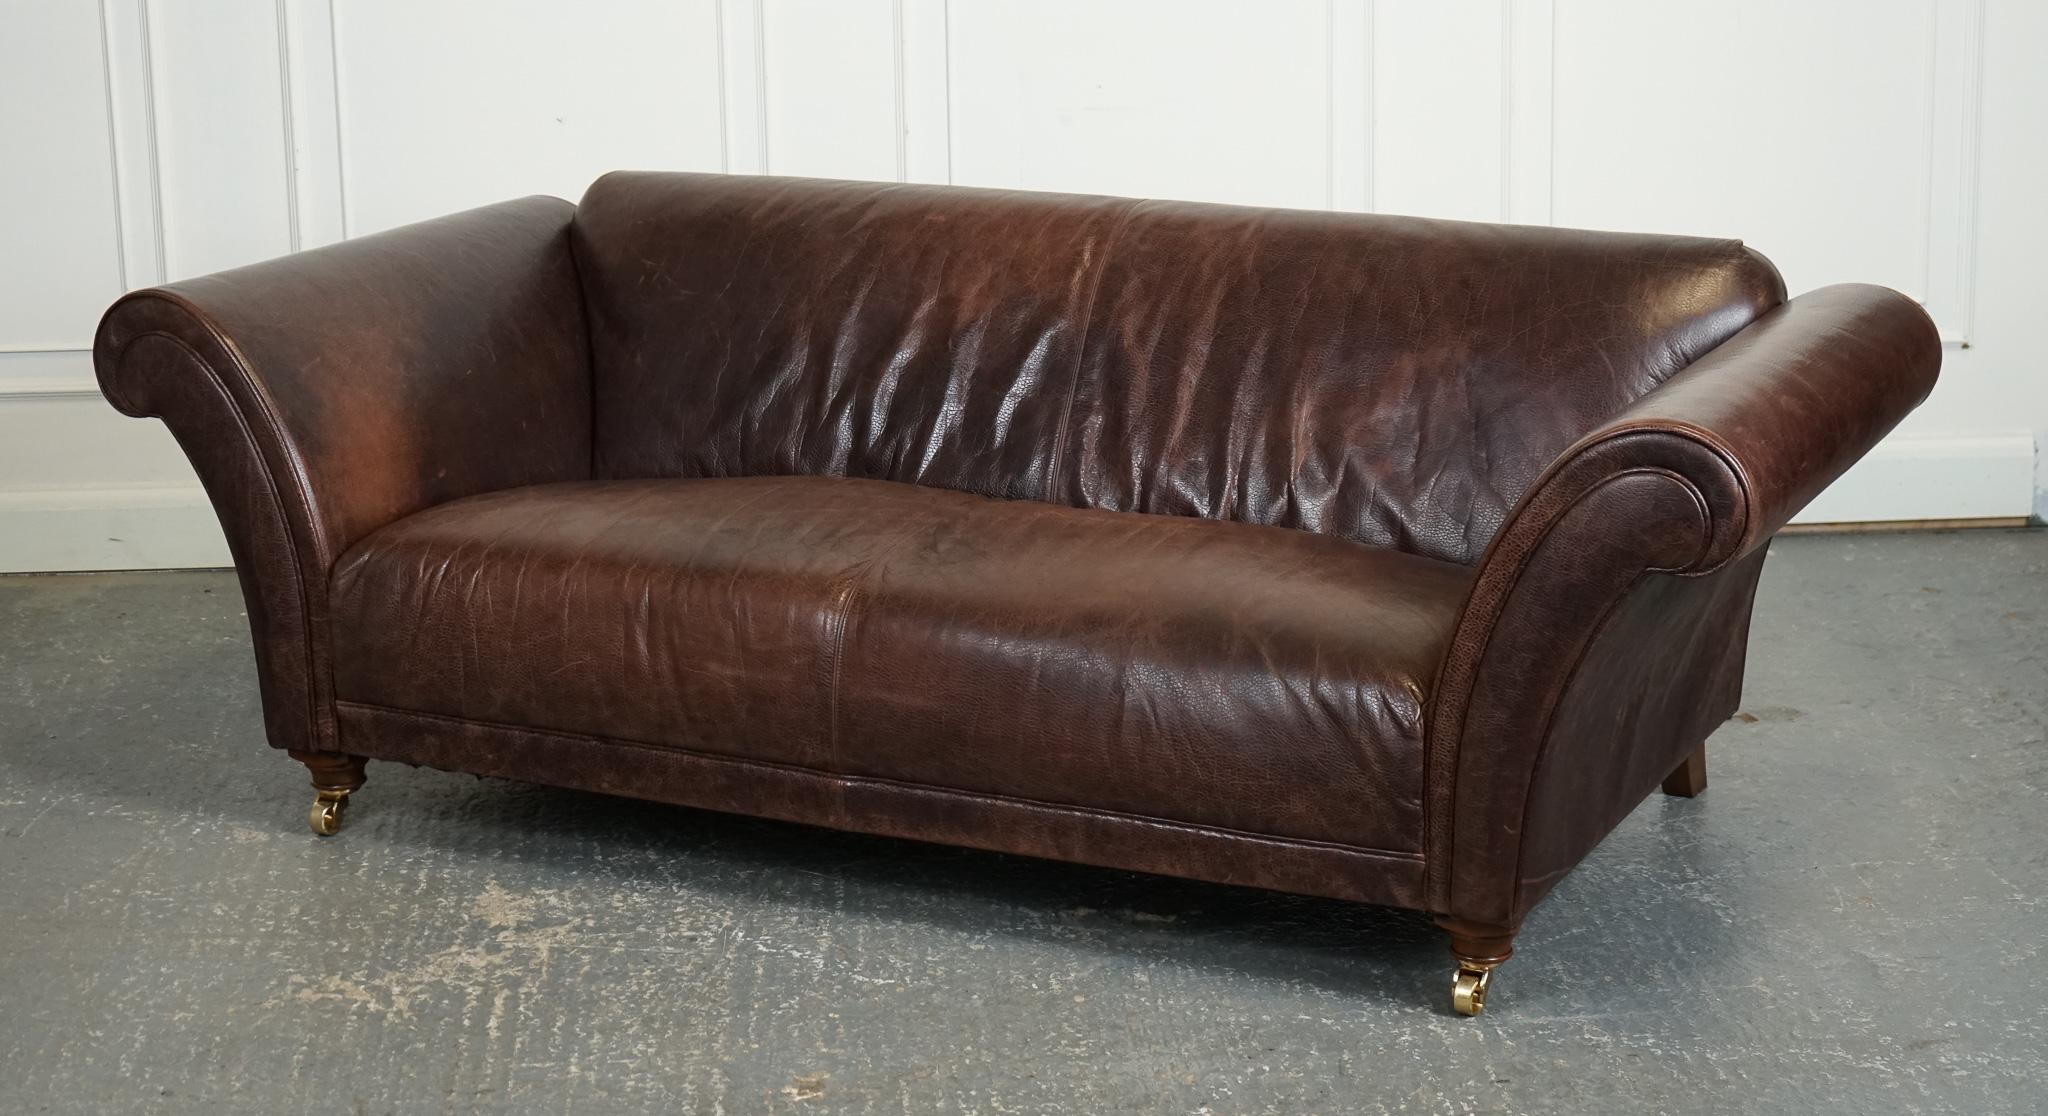 

We are delighted to offer for sale this Lovely Fishpools Brown Heritage Leather Sofa.

This beautiful Fishpools Heritage sofa is a must-have for any home decor enthusiast. The rich brown leather upholstery adds a touch of luxury to any living